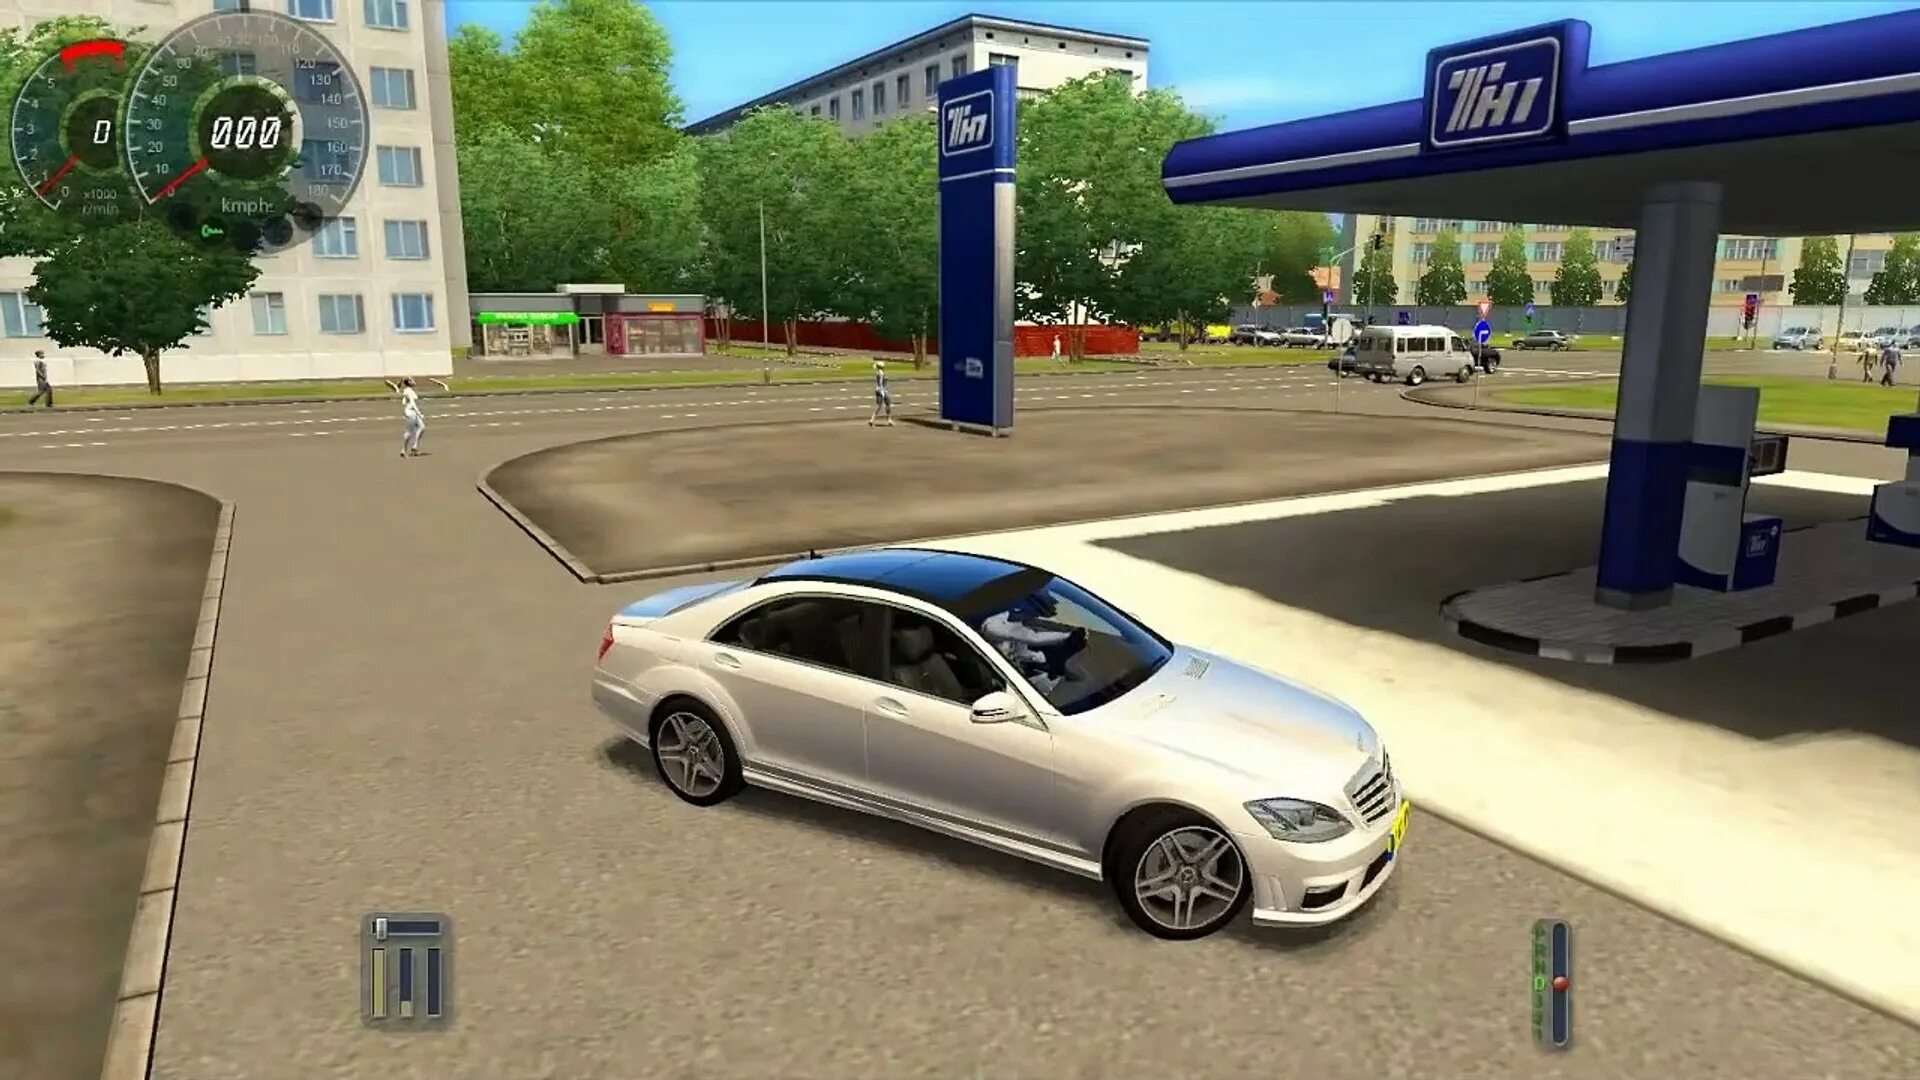 Сити кар драйвинг игруха. City car Driving Mercedes. City car Driving 2007 г.. Диск Сити кар драйвинг. City car Driving 1.3.1.